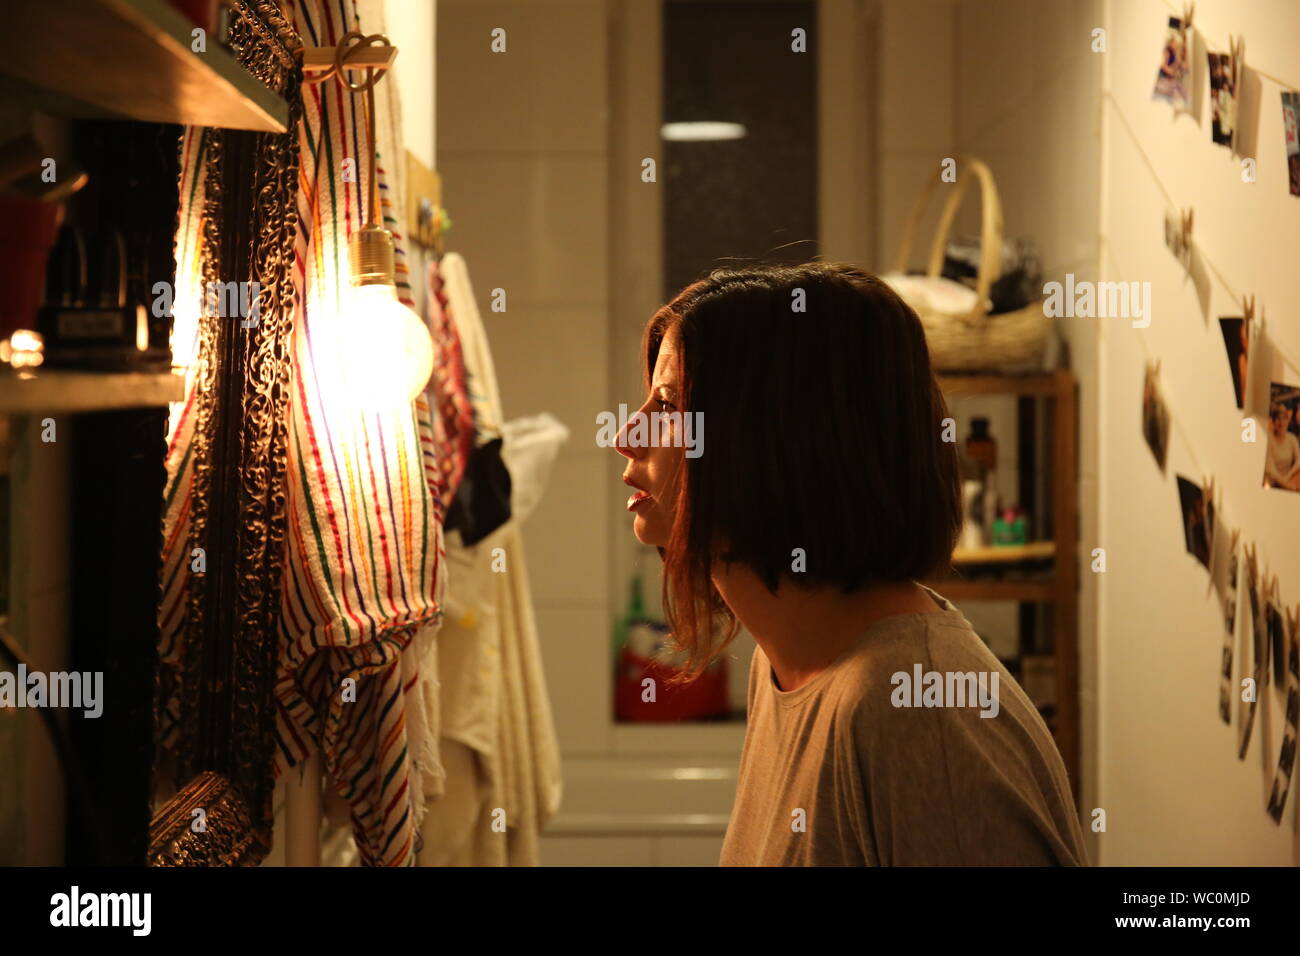 Side View Of Young Woman Looking Towards Illuminated Light Bulb At Home Stock Photo